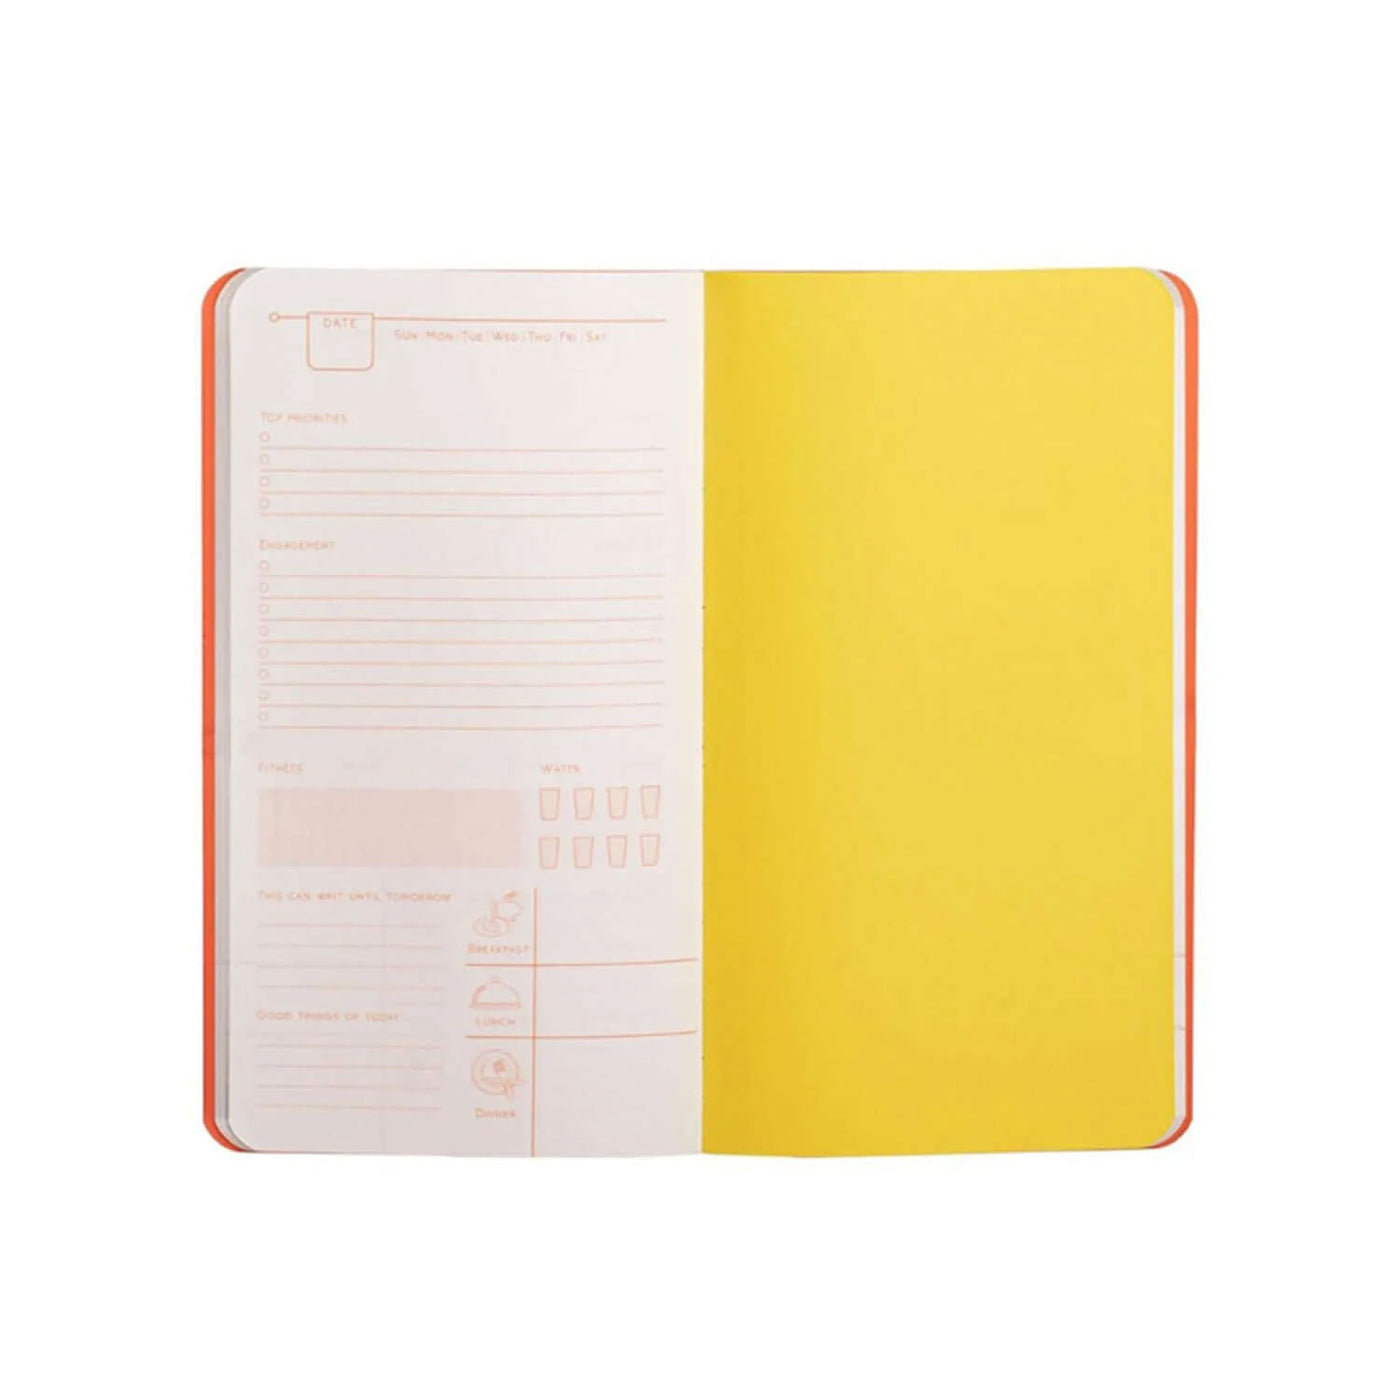 Pennline Quikfill Notebook Refill For Quikrite, Orange - Set Of 2 5